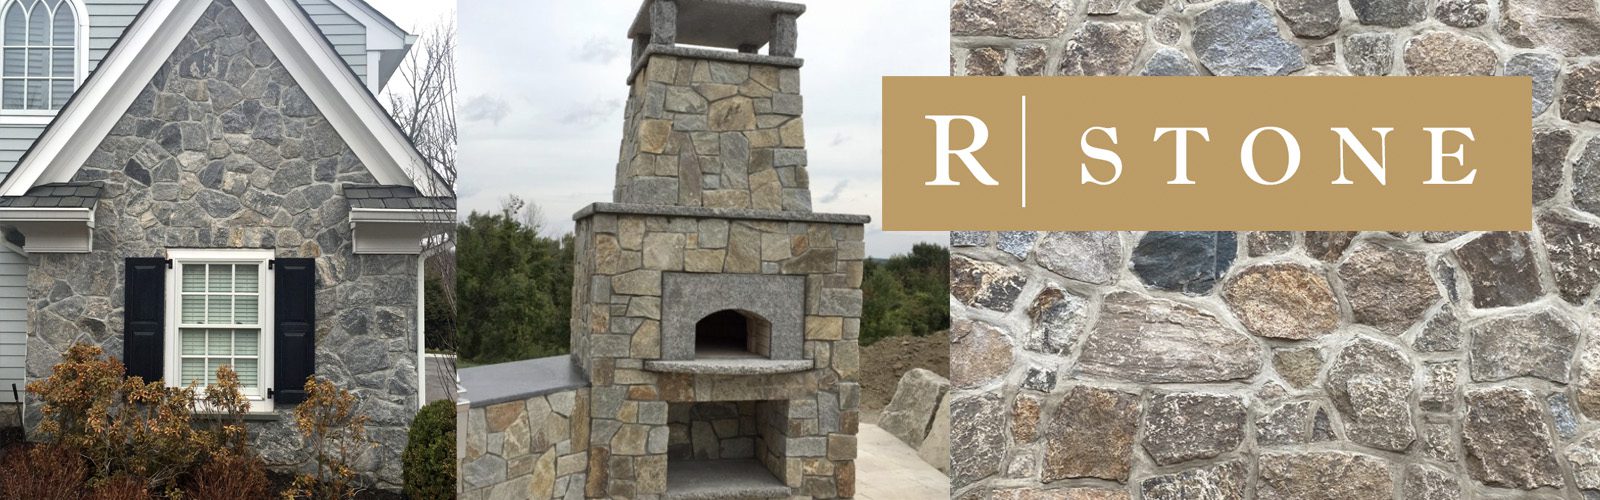 We are and RStone dealer who stocks RStone products in our NJ stone yard